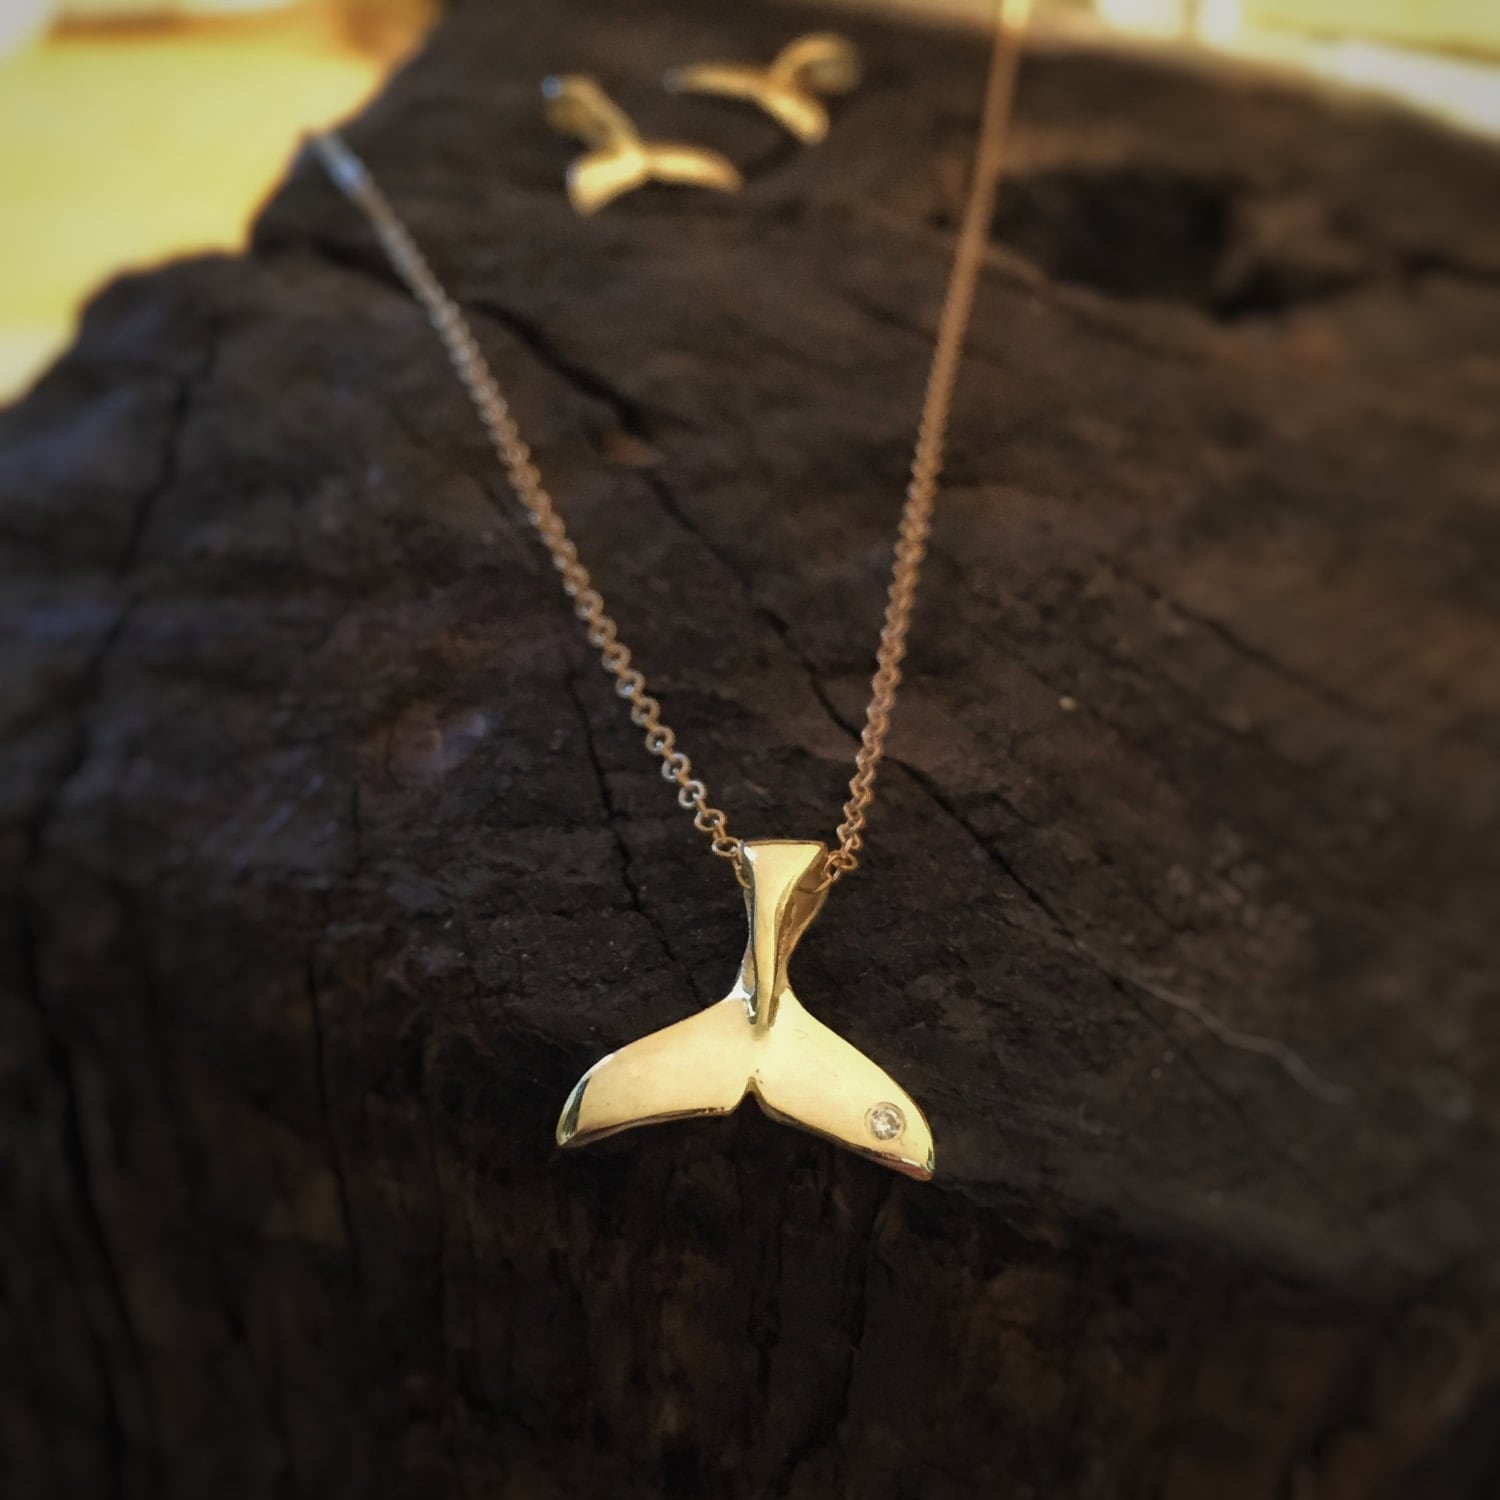 14k Gold Whale Tail Pendant Necklace and Earring Set, 16